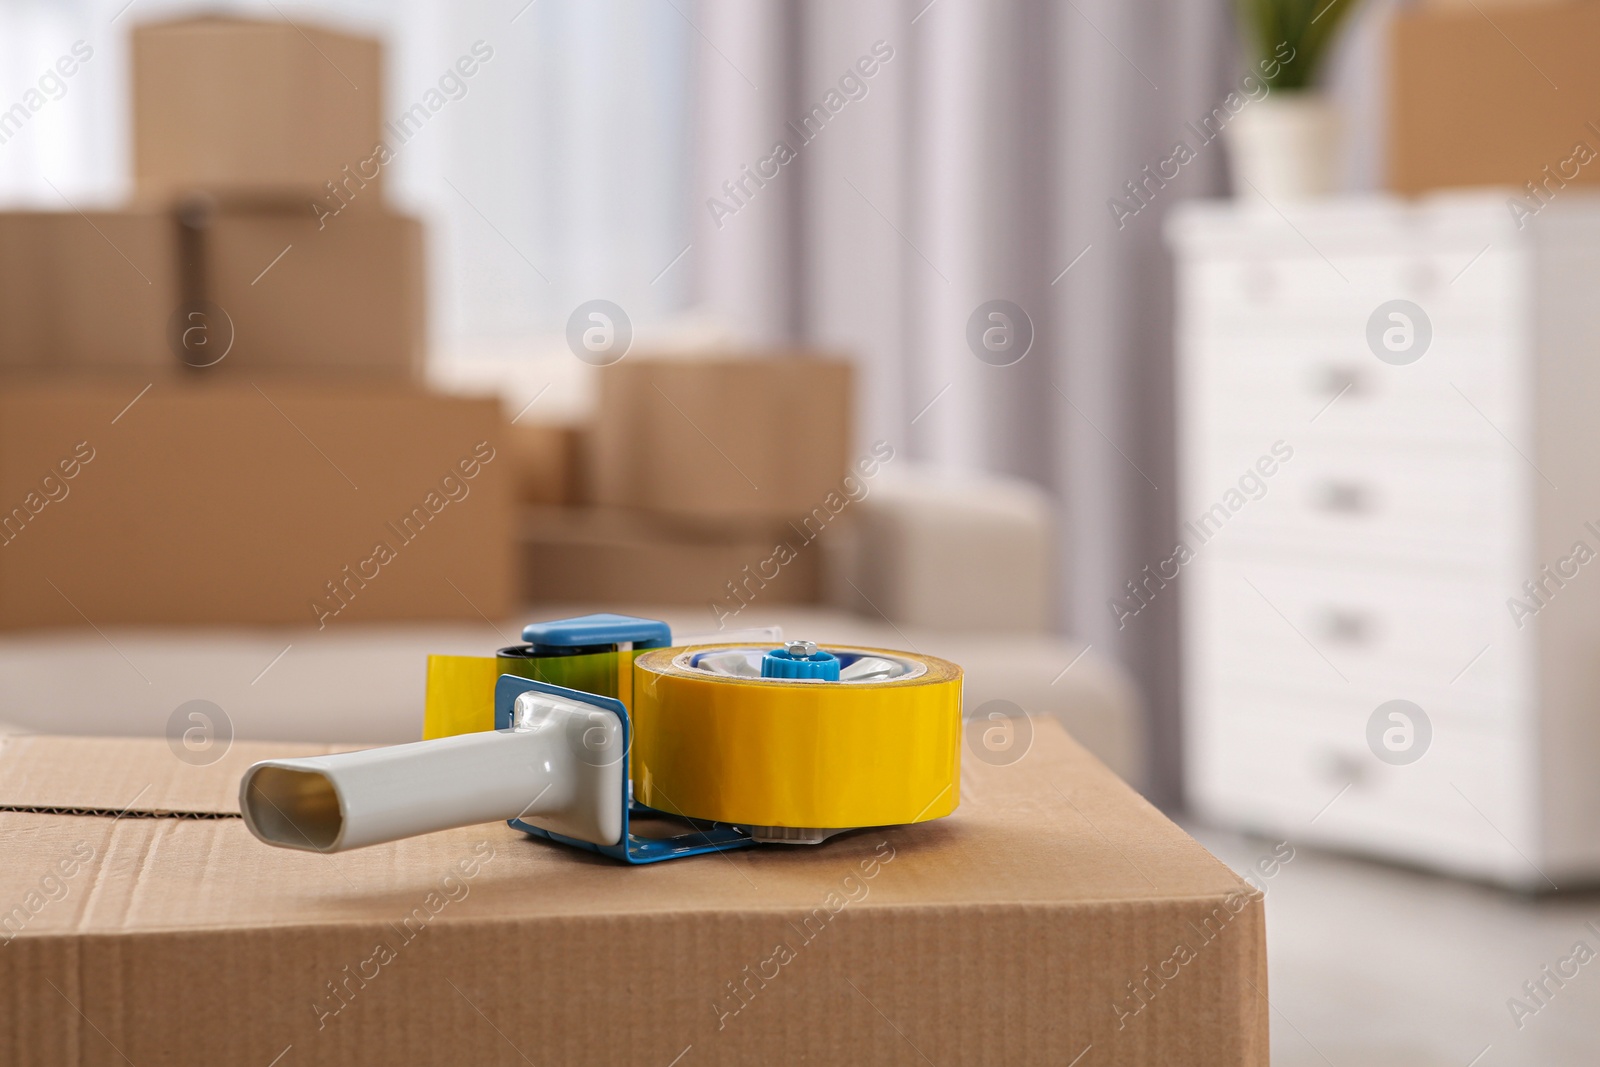 Photo of Dispenser with roll of adhesive tape on box indoors. Space for text